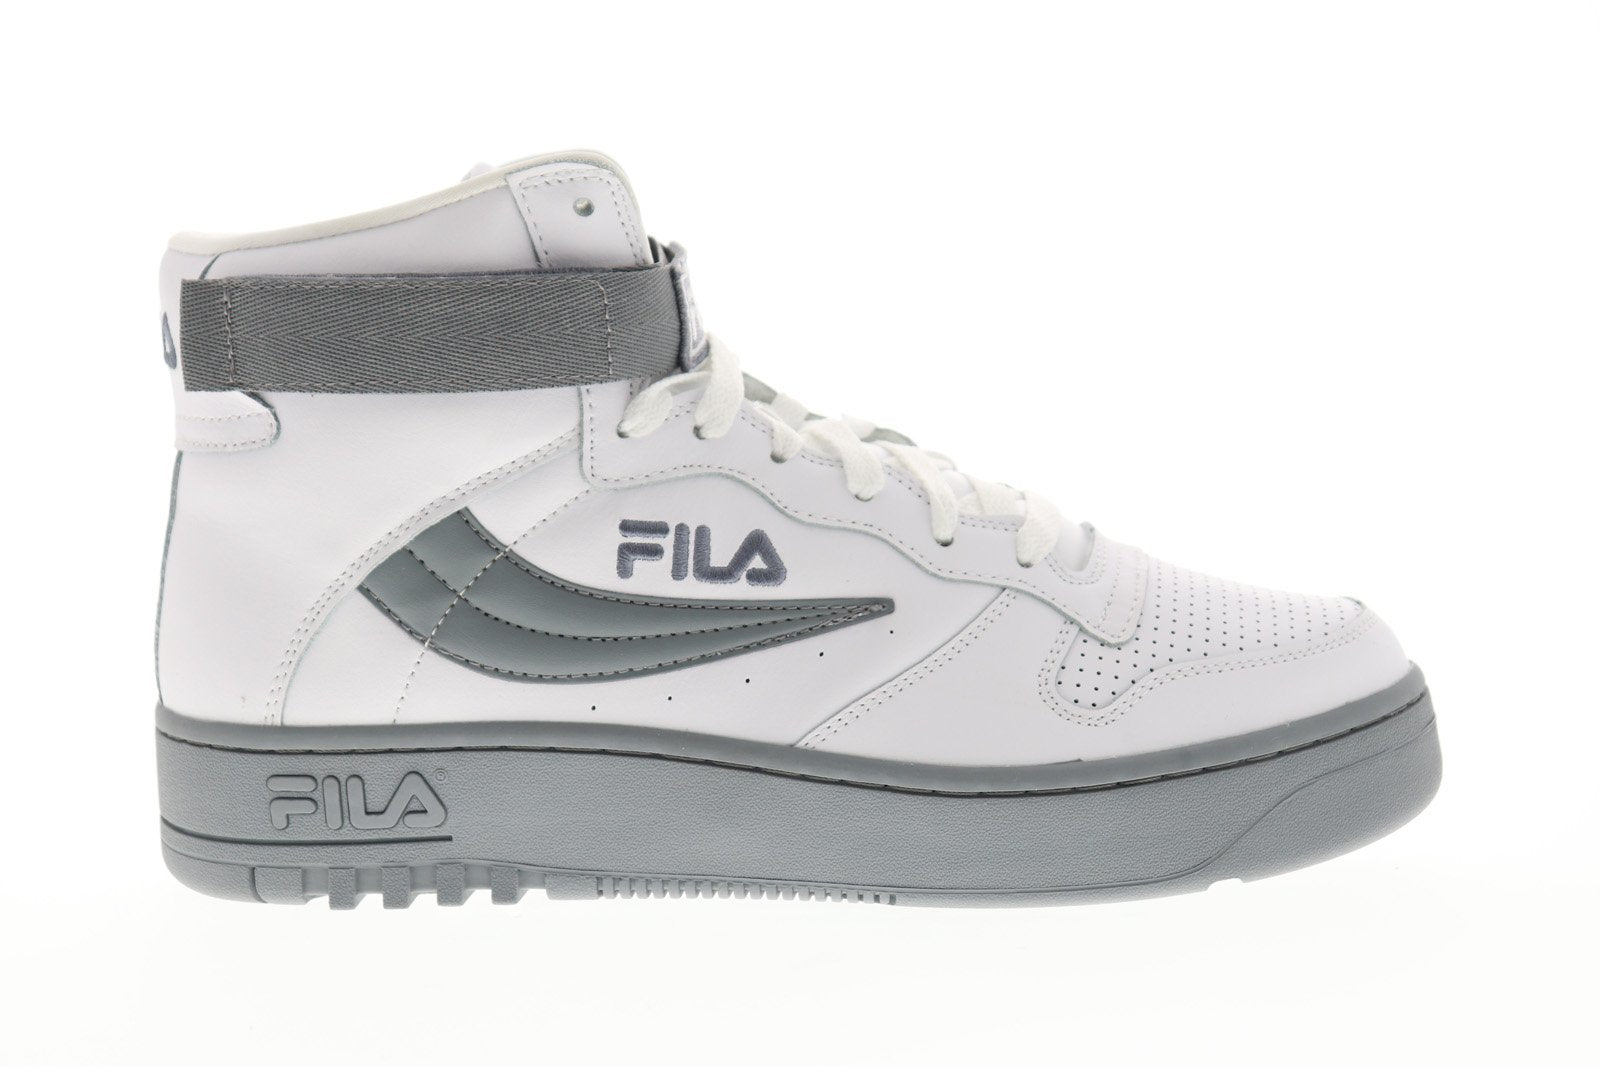 Fila Fx-100 1VB90179-101 Mens White Leather Casual Lifestyle Sneakers ...